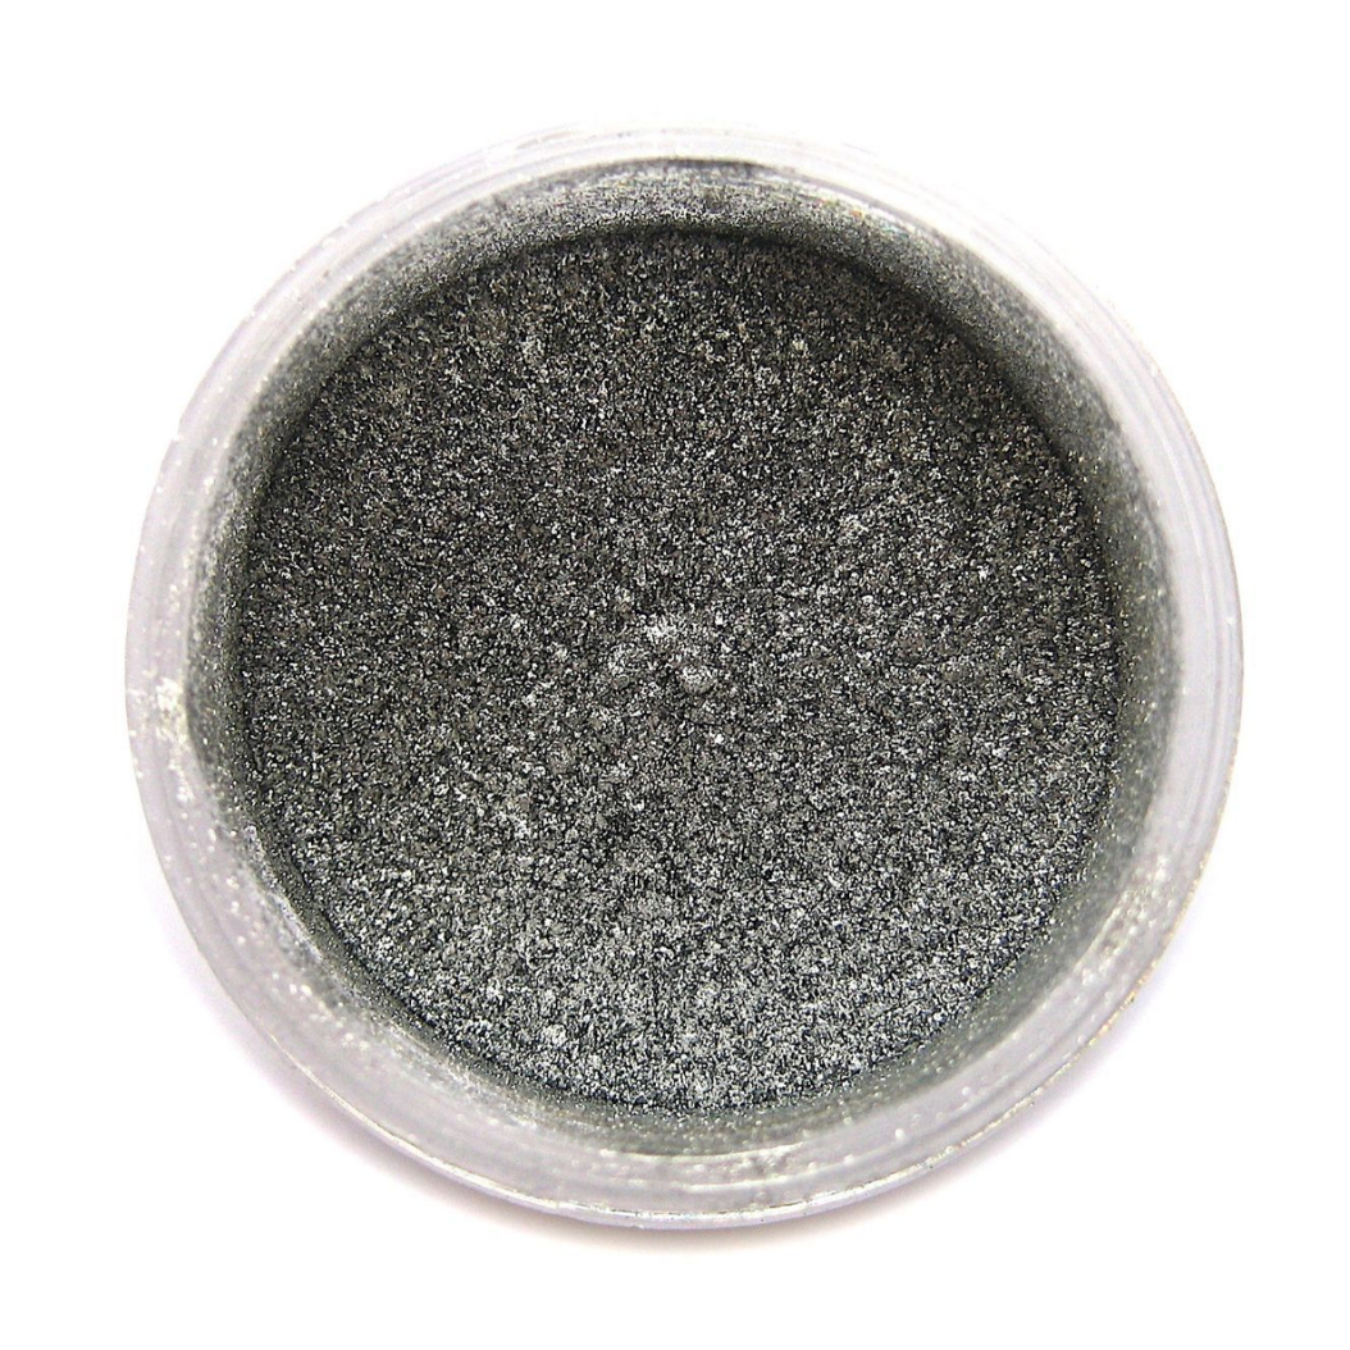 Silver luster dust, silver highlighter, silver metallic highlighter, shine silver, drip silver 